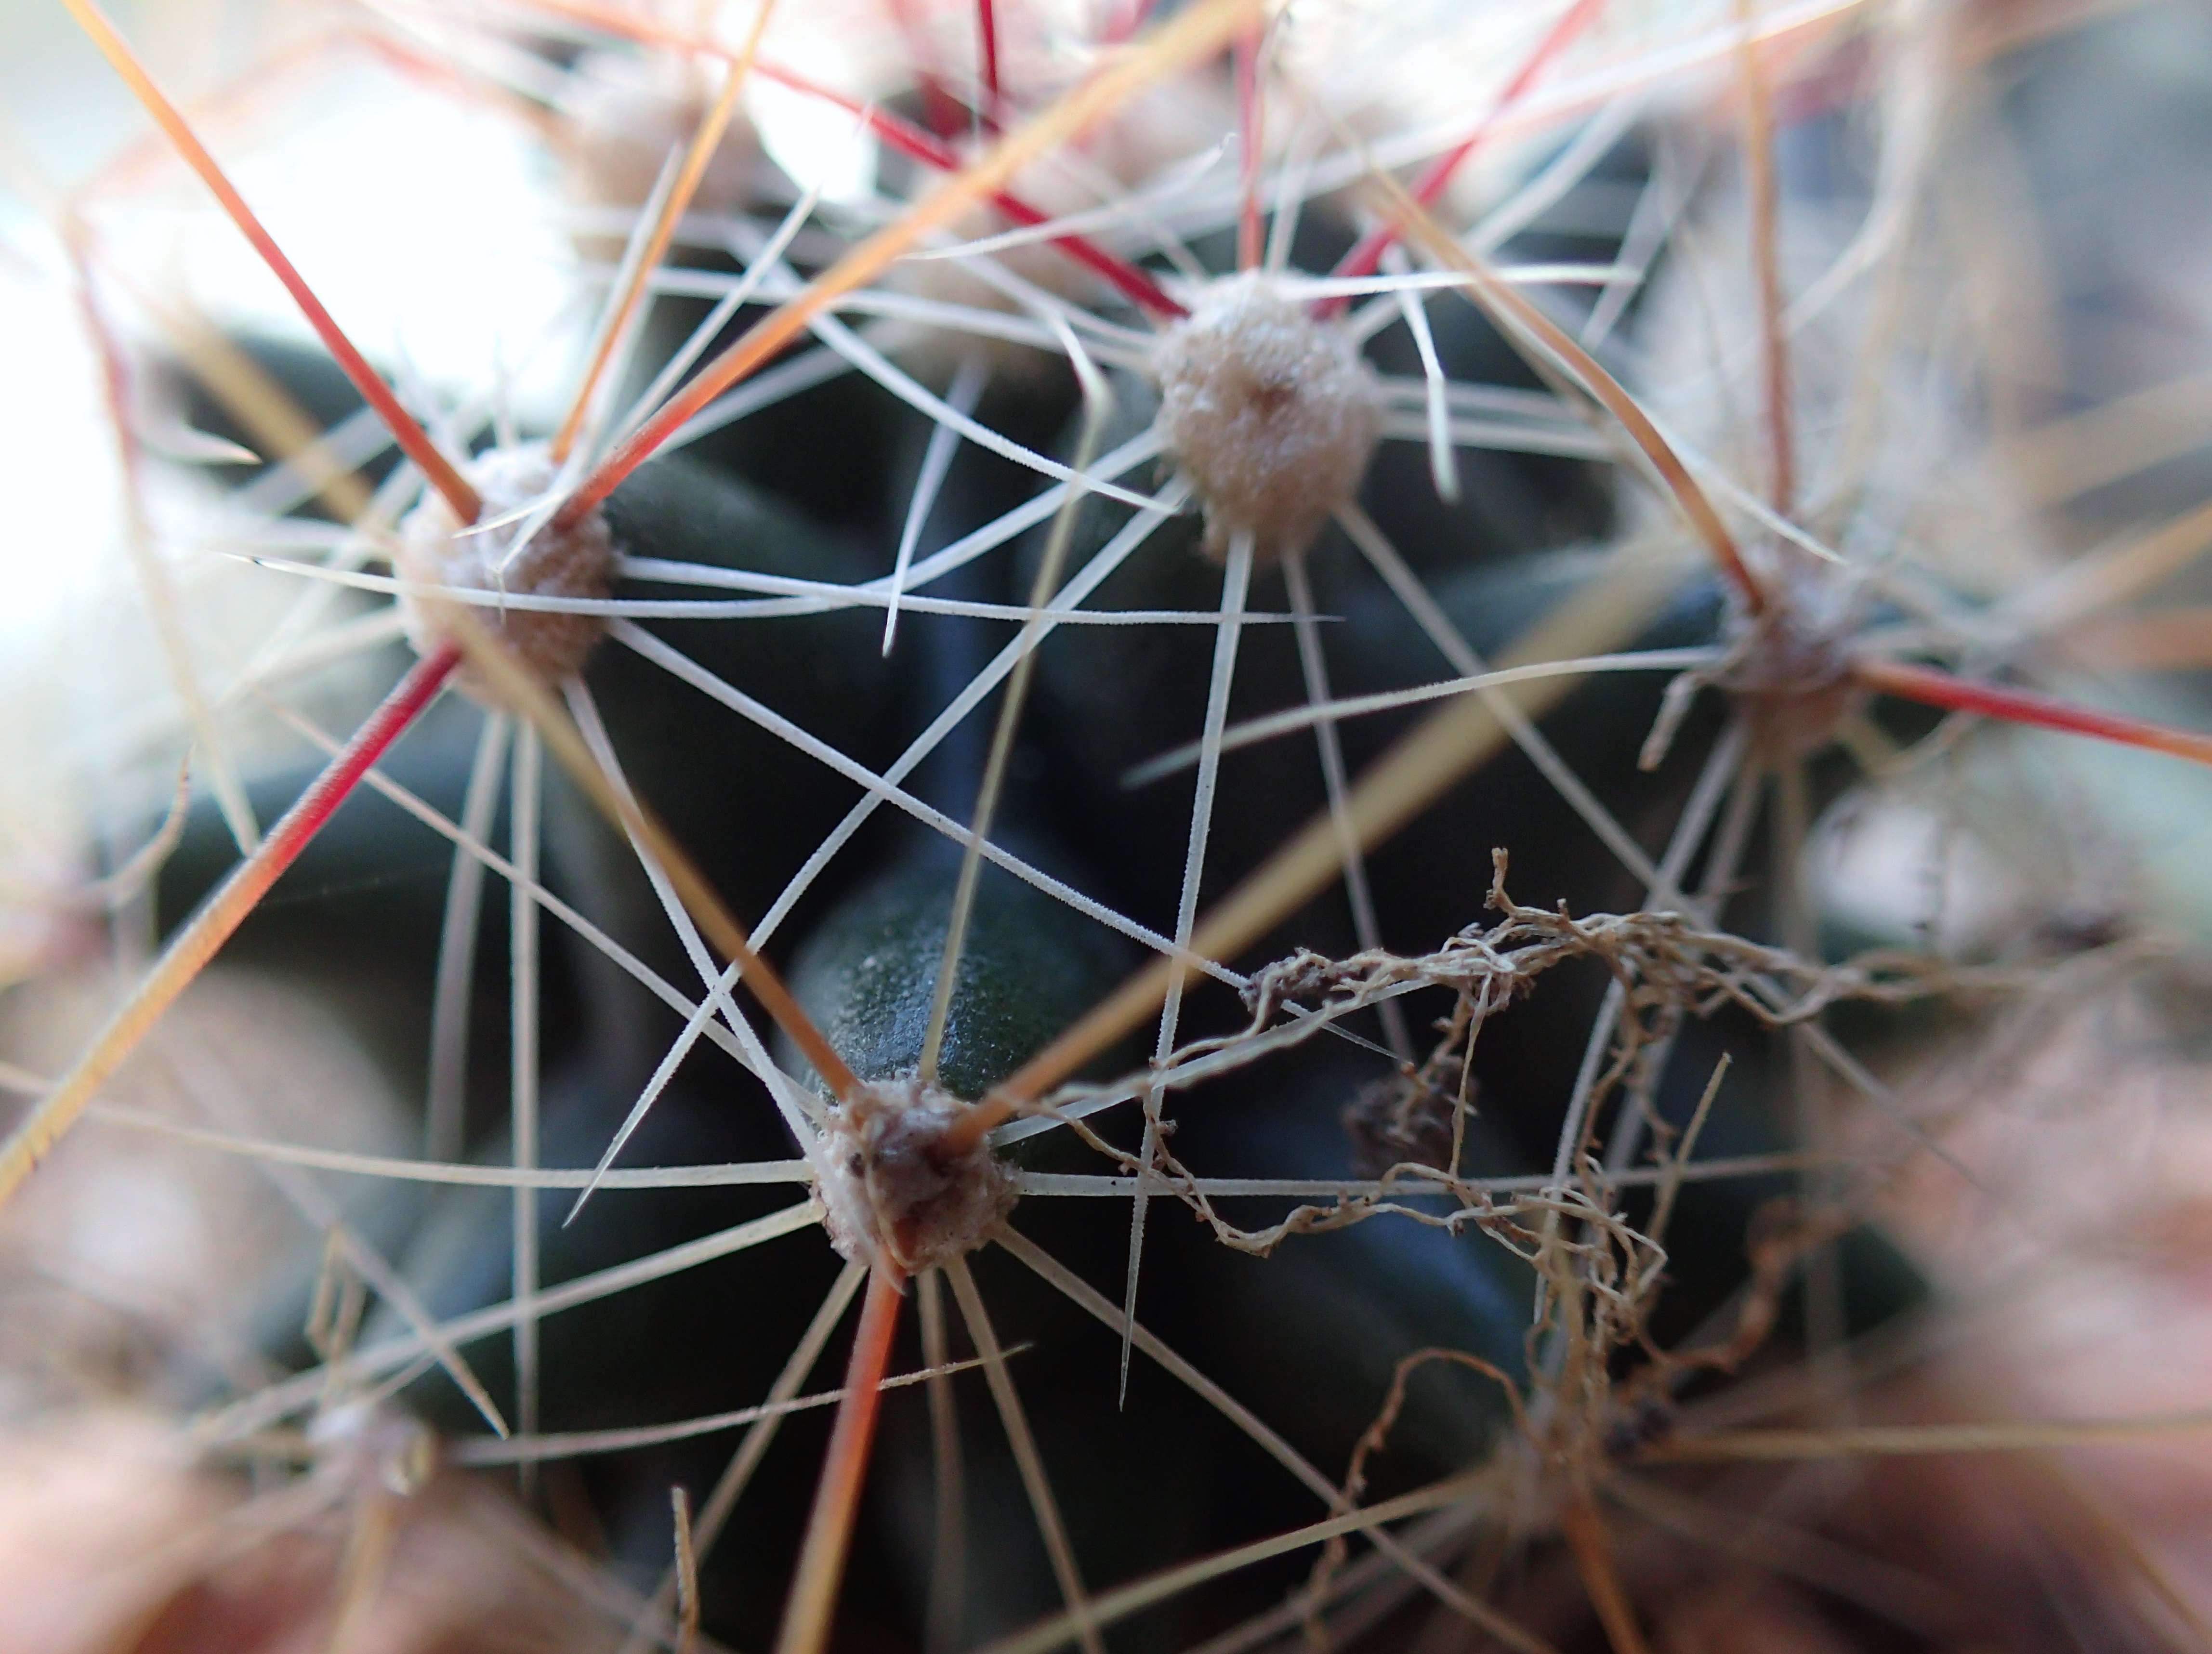 Another macro shot of cactus on the balcony